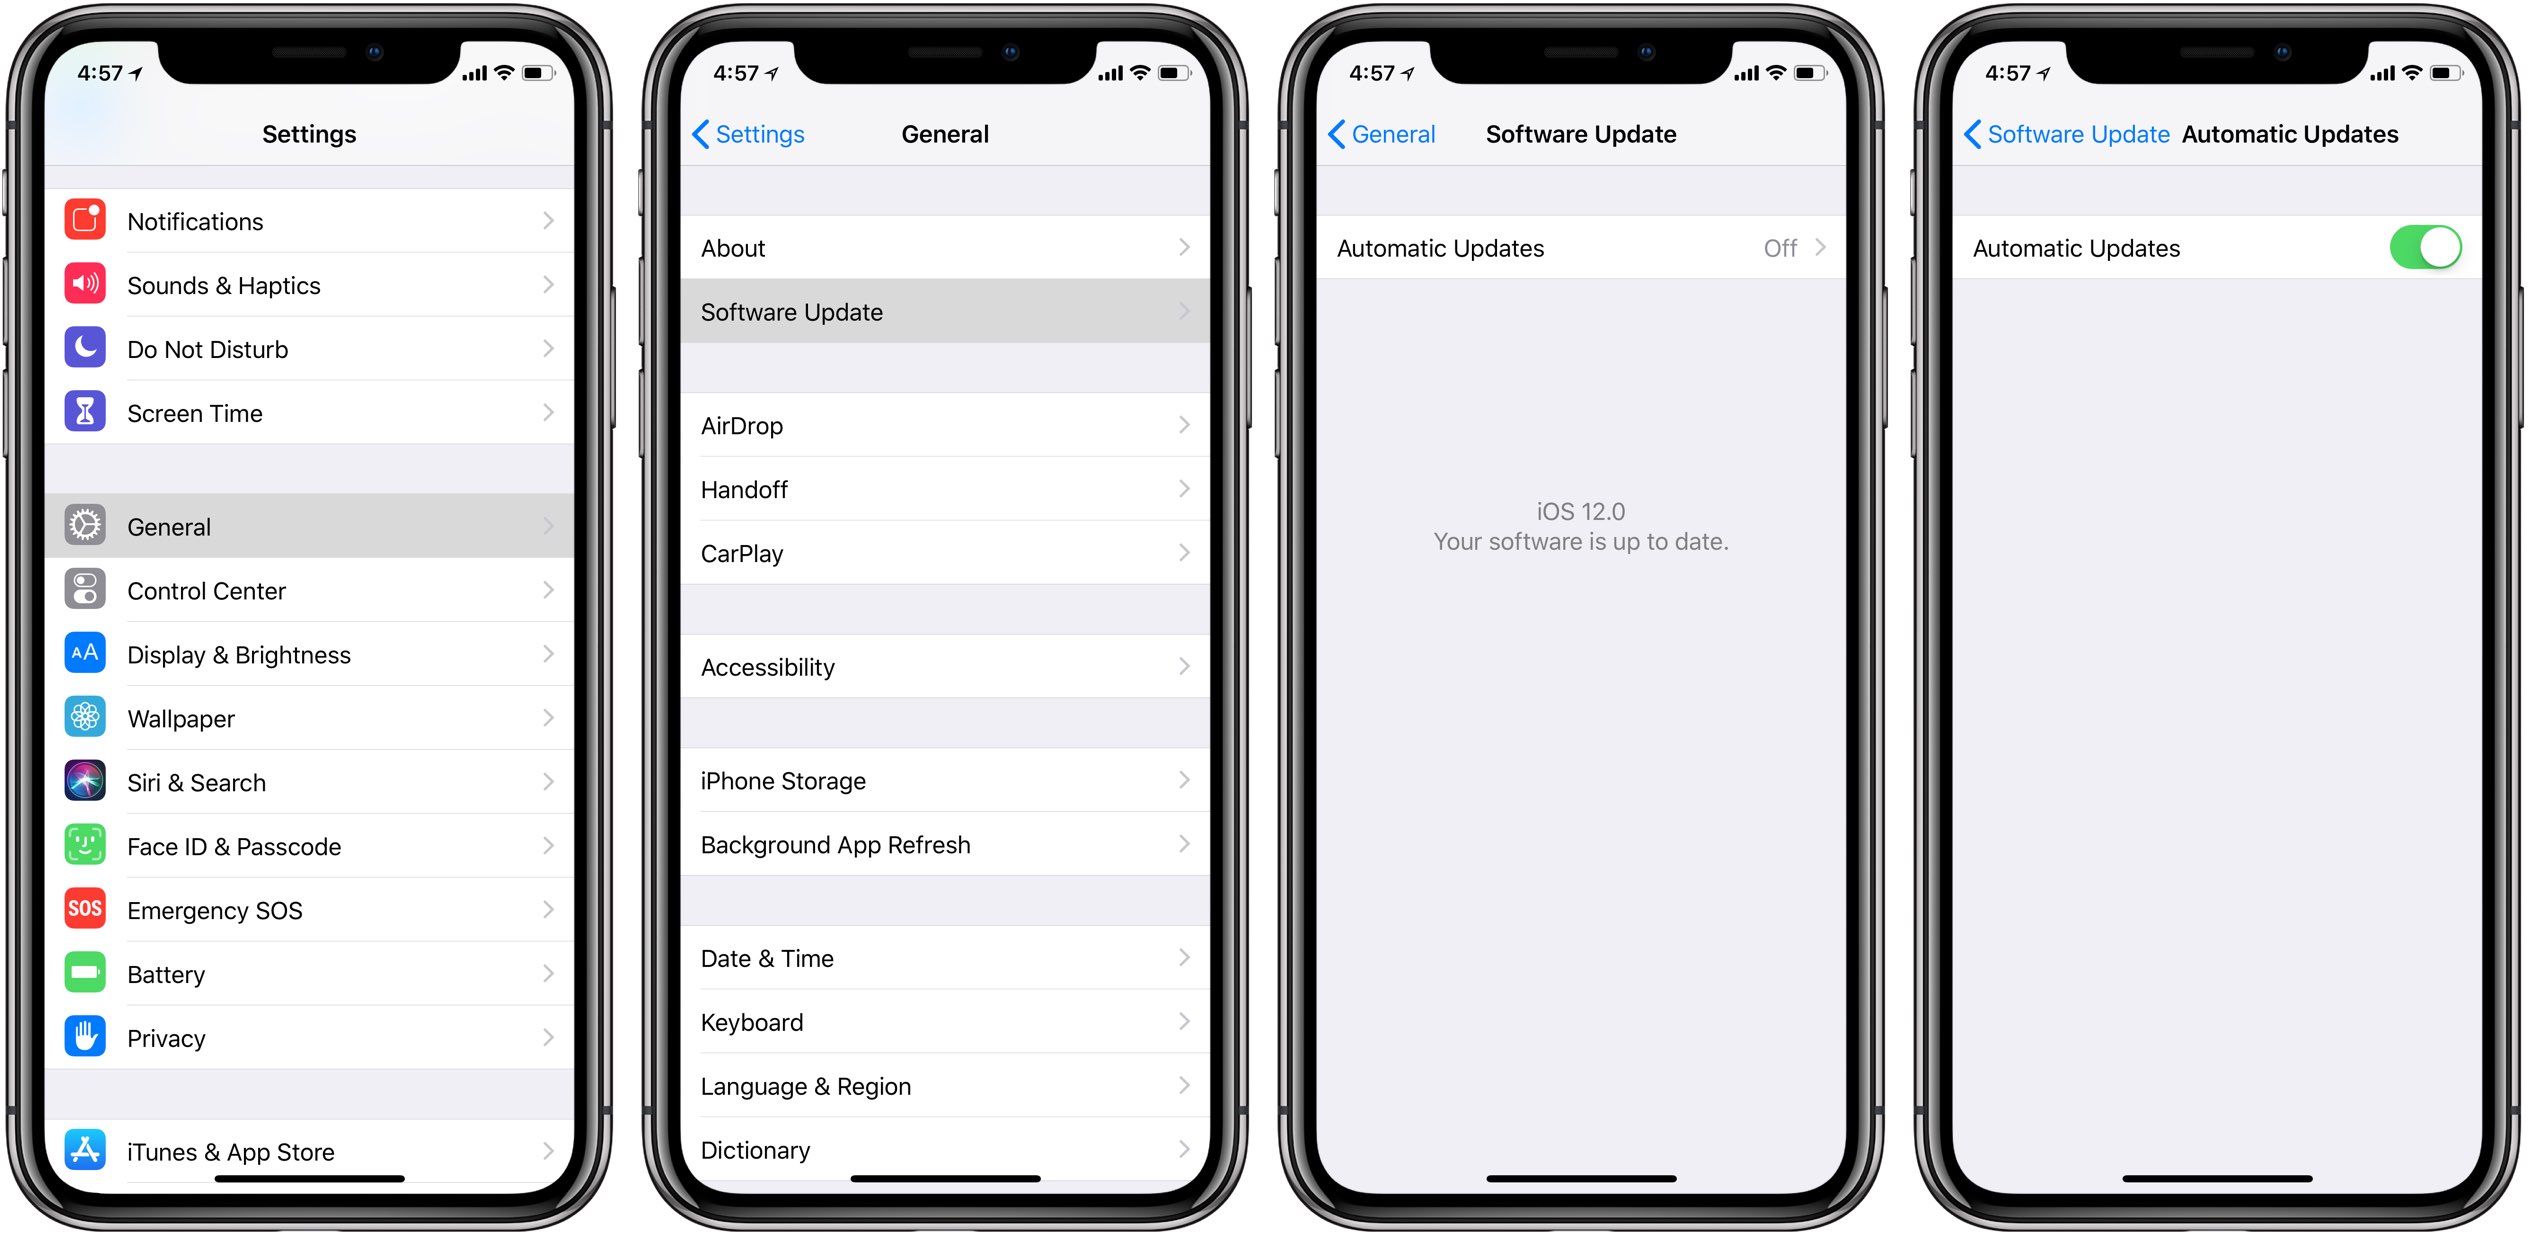 How to enable Automatic Updates for iOS releases on iPhone and iPad